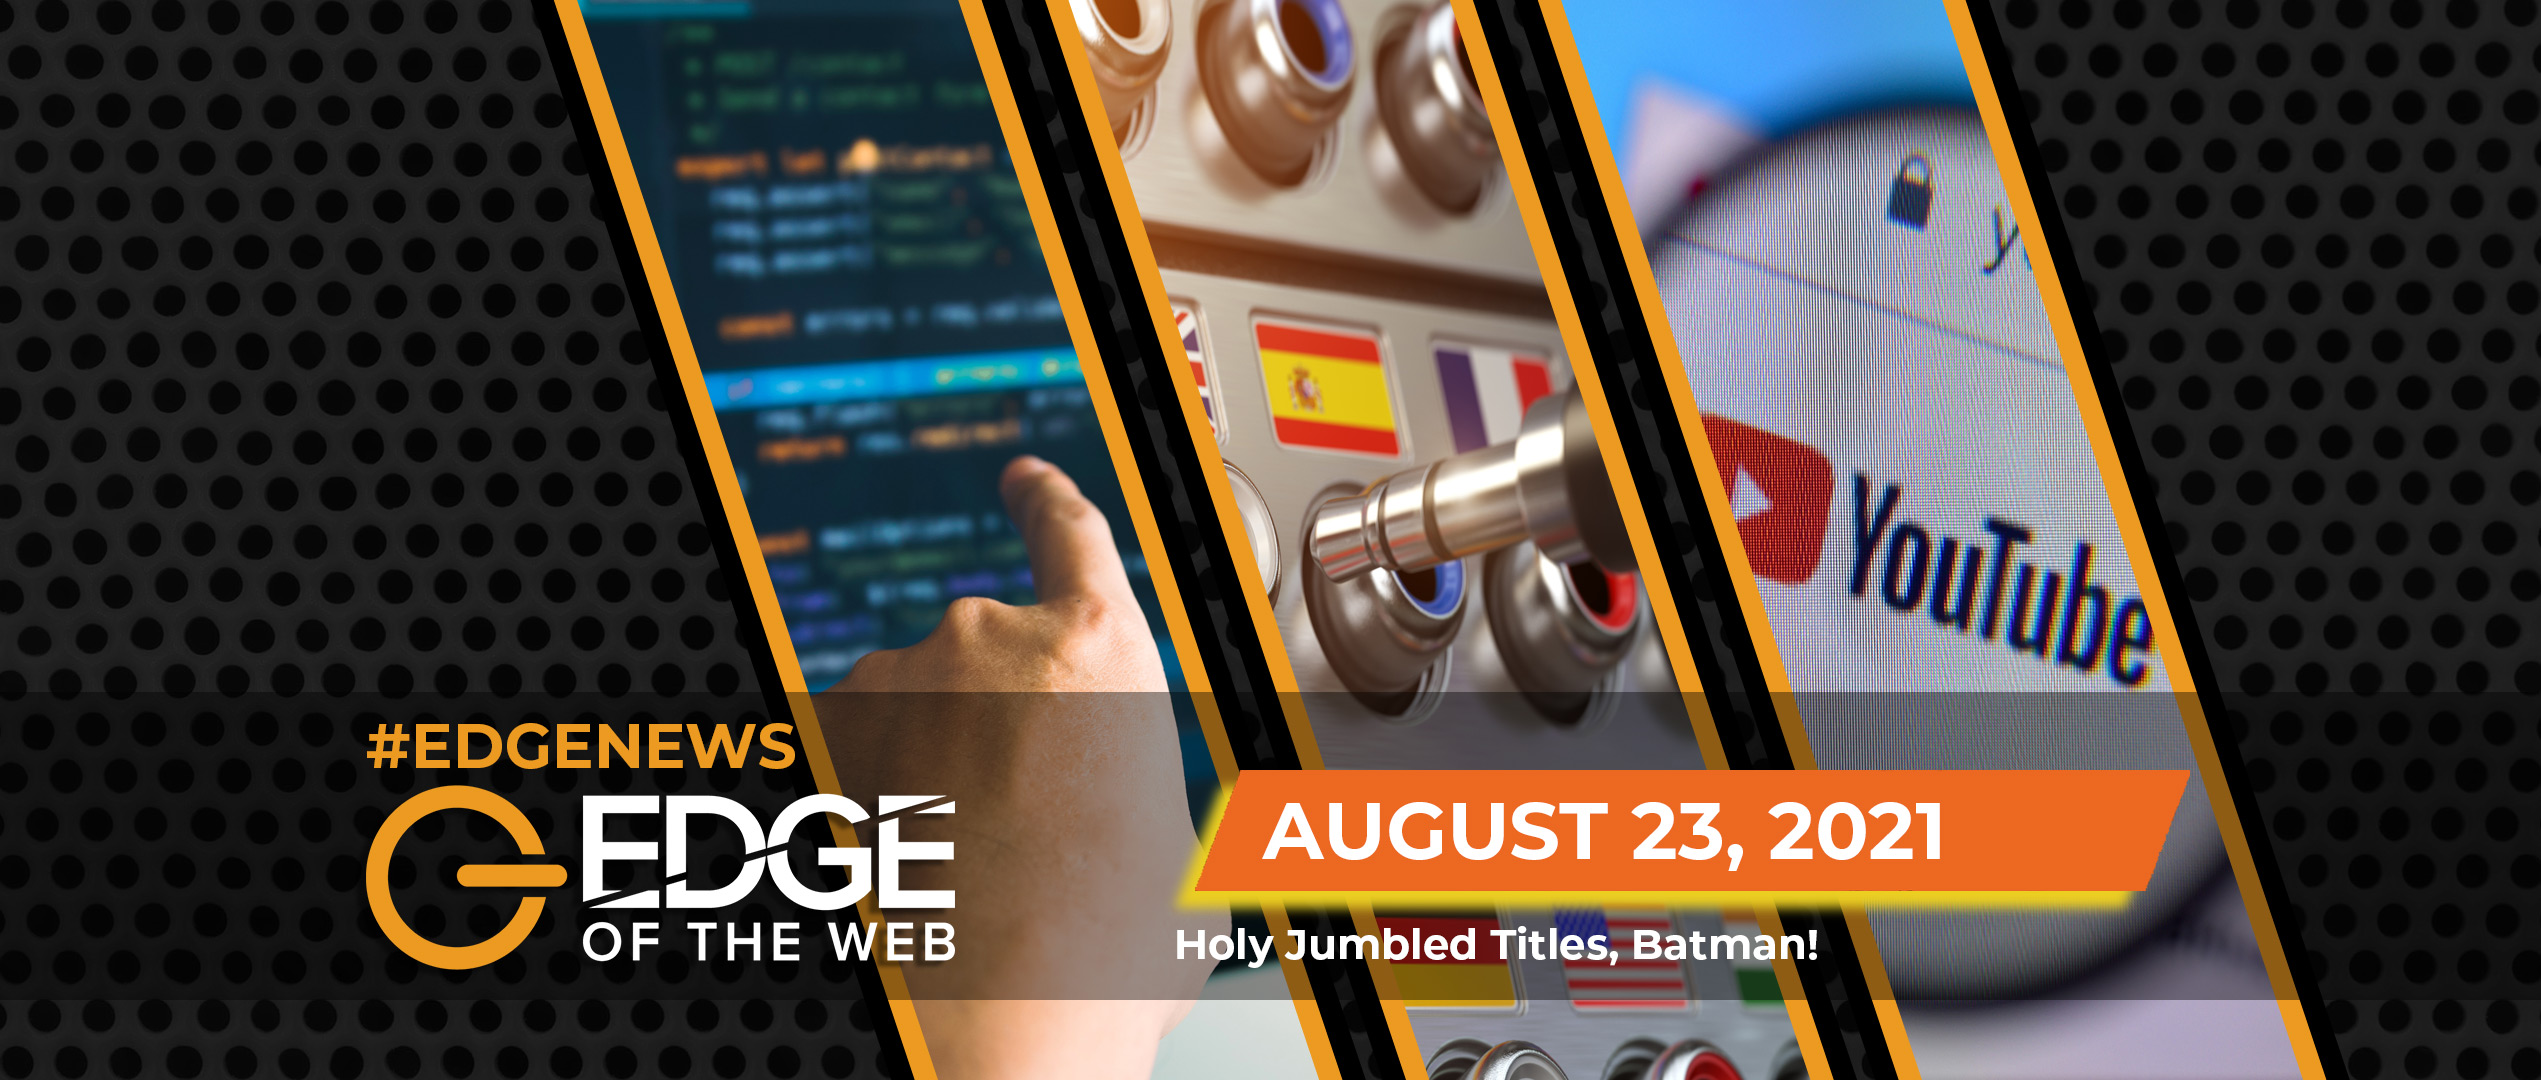 444 | News from the EDGE | Week of 8.23.2021